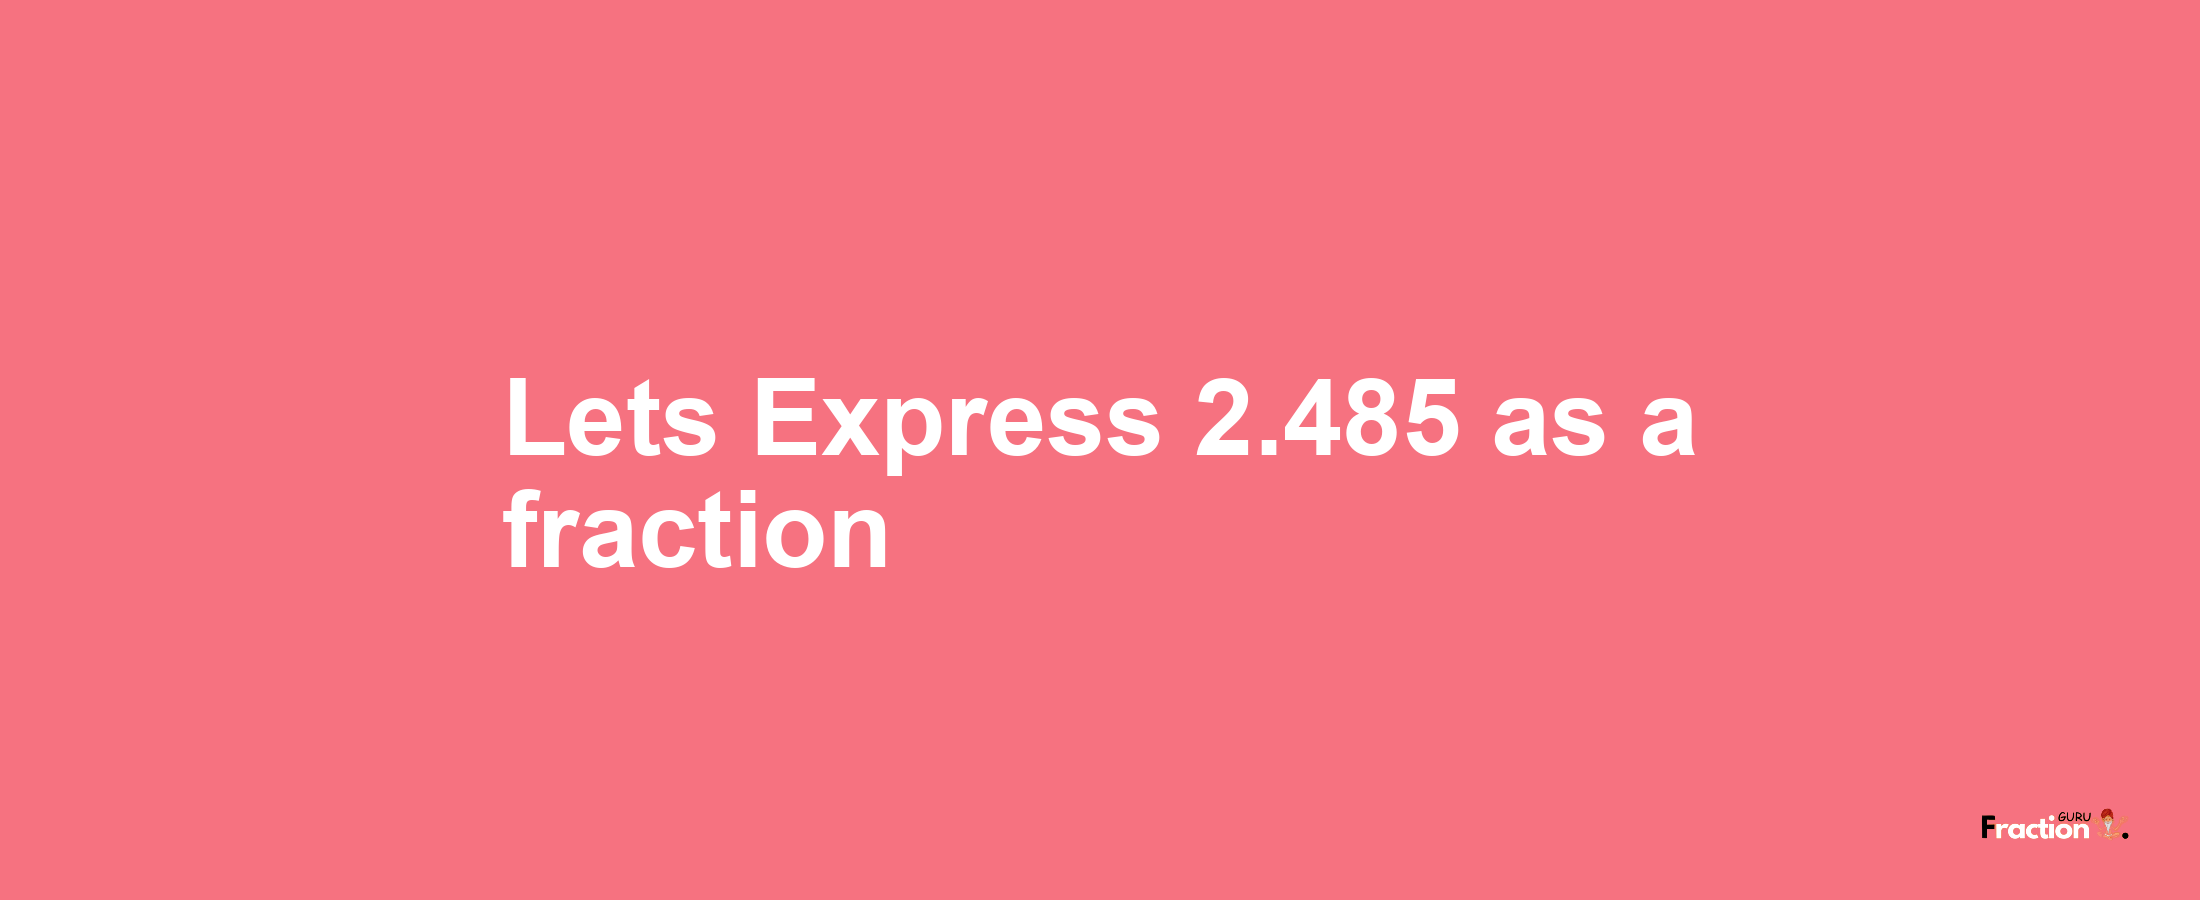 Lets Express 2.485 as afraction